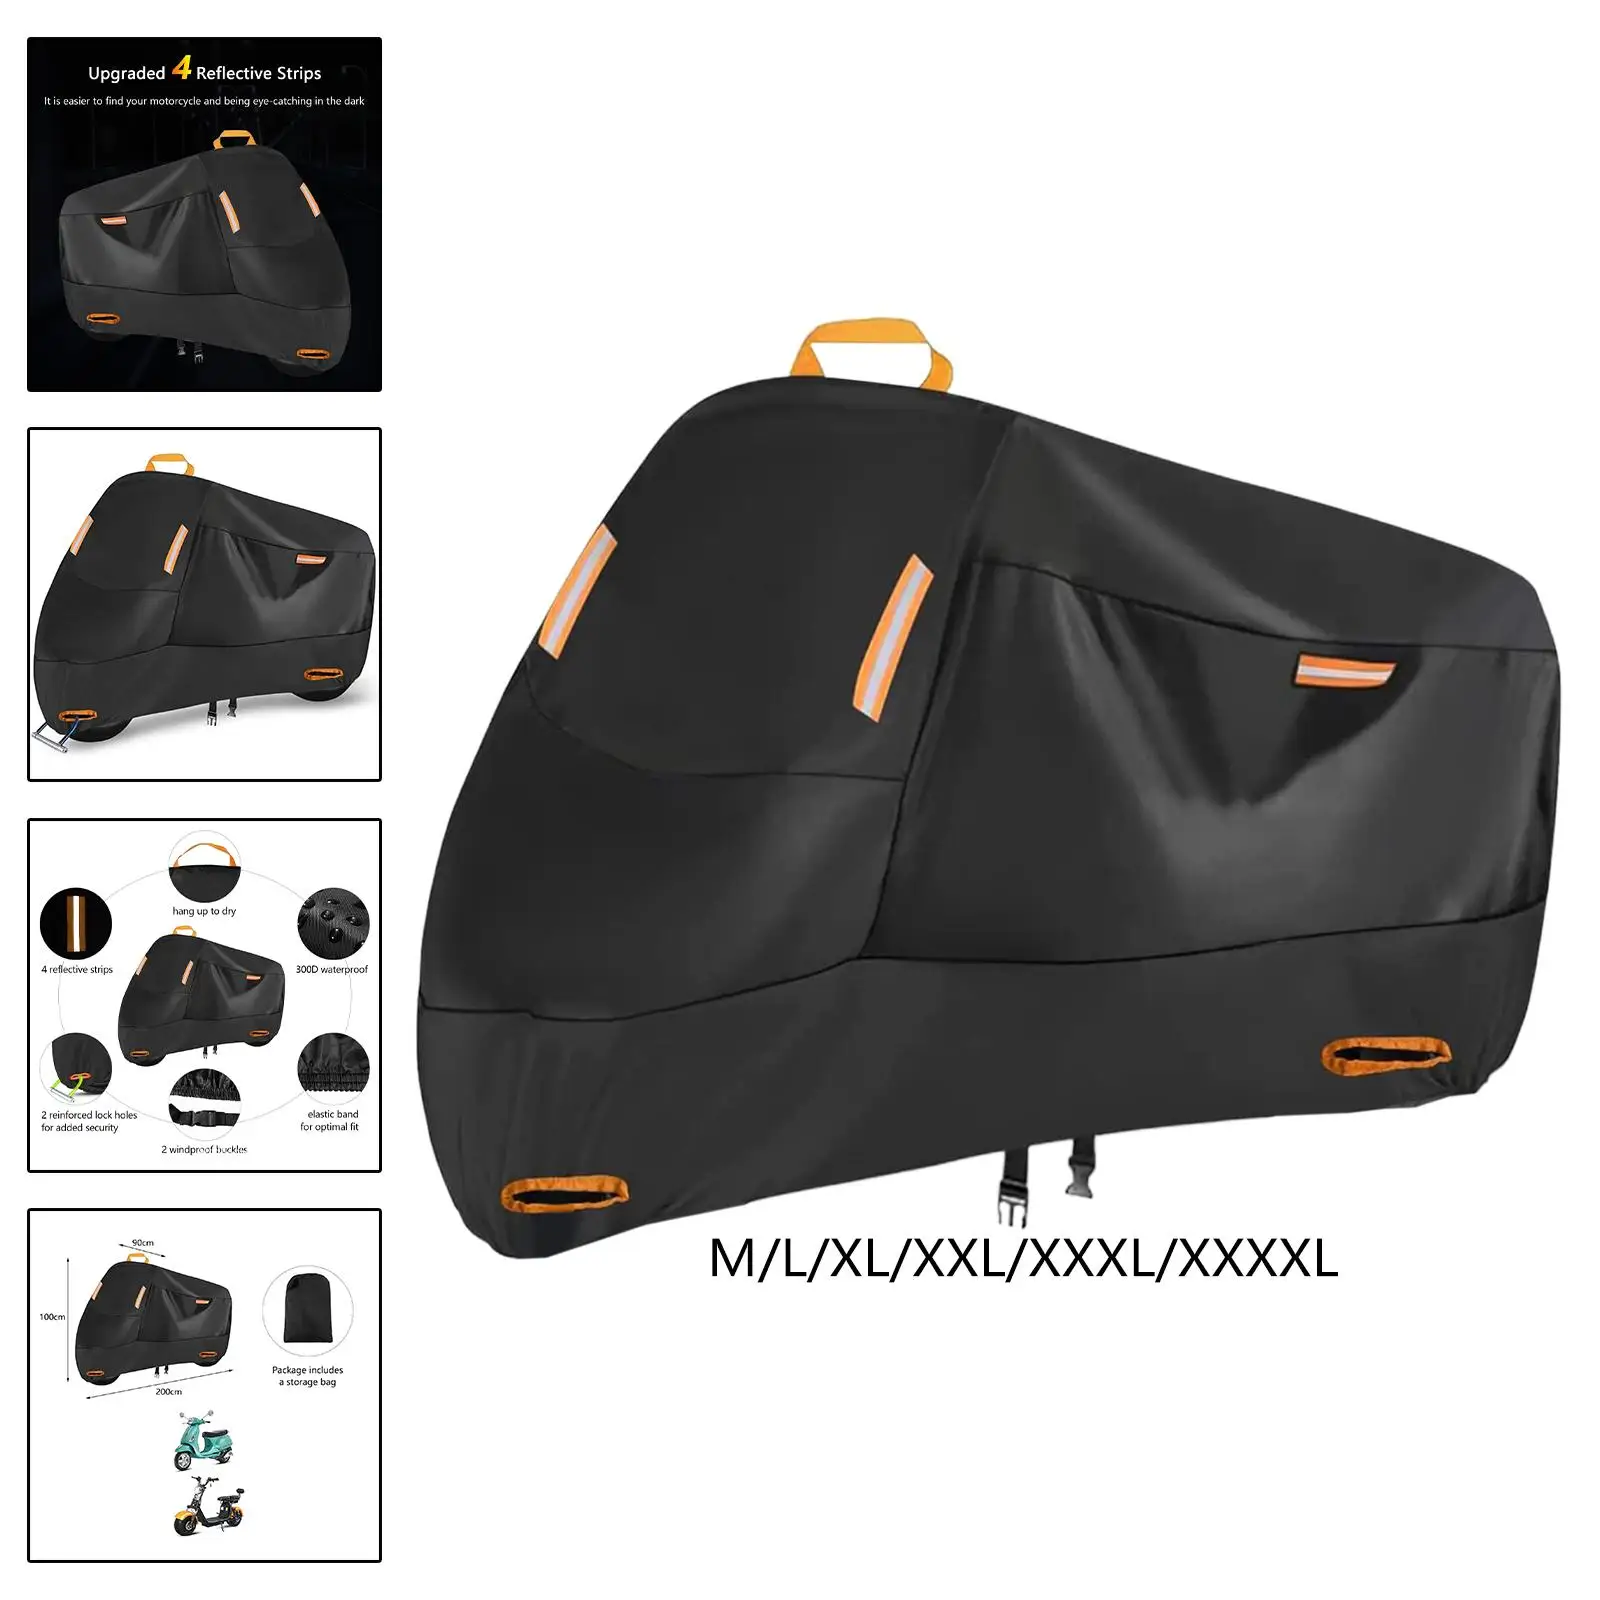 210D Motorcycle Cover with 4 Reflective Strips Motorbike Cover Scooter Cover for Bike Motorbike Scooter Outdoor Protection